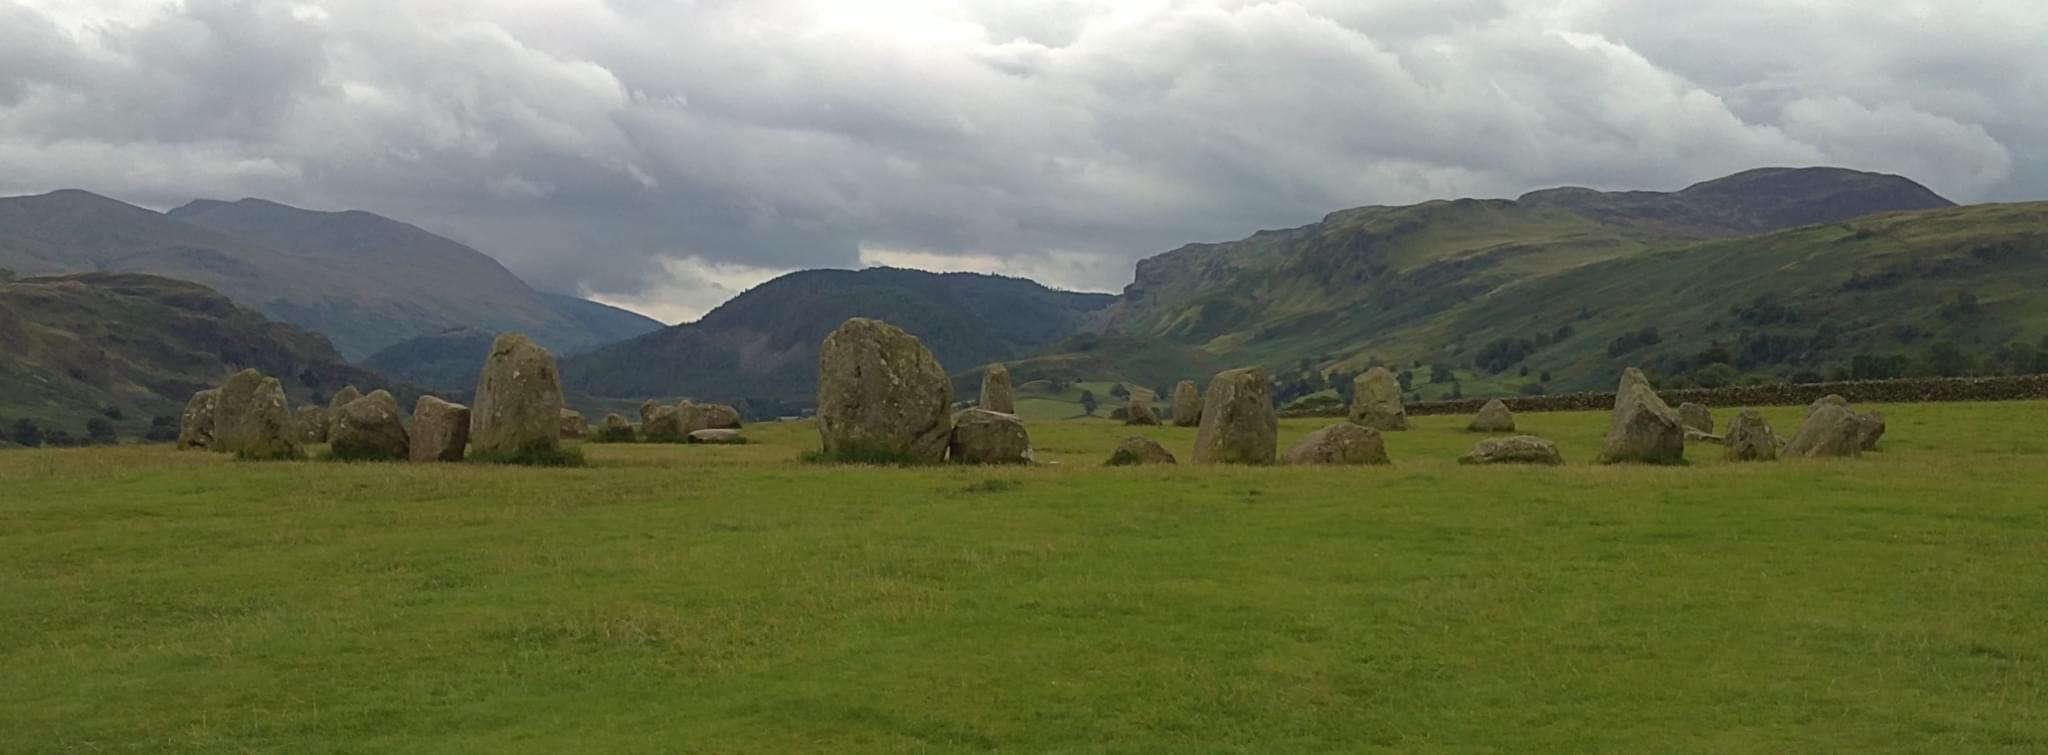 The circle currently consists of 38 standing stones. The tallest stone is 7ft high.
Photo taken Aug 2011